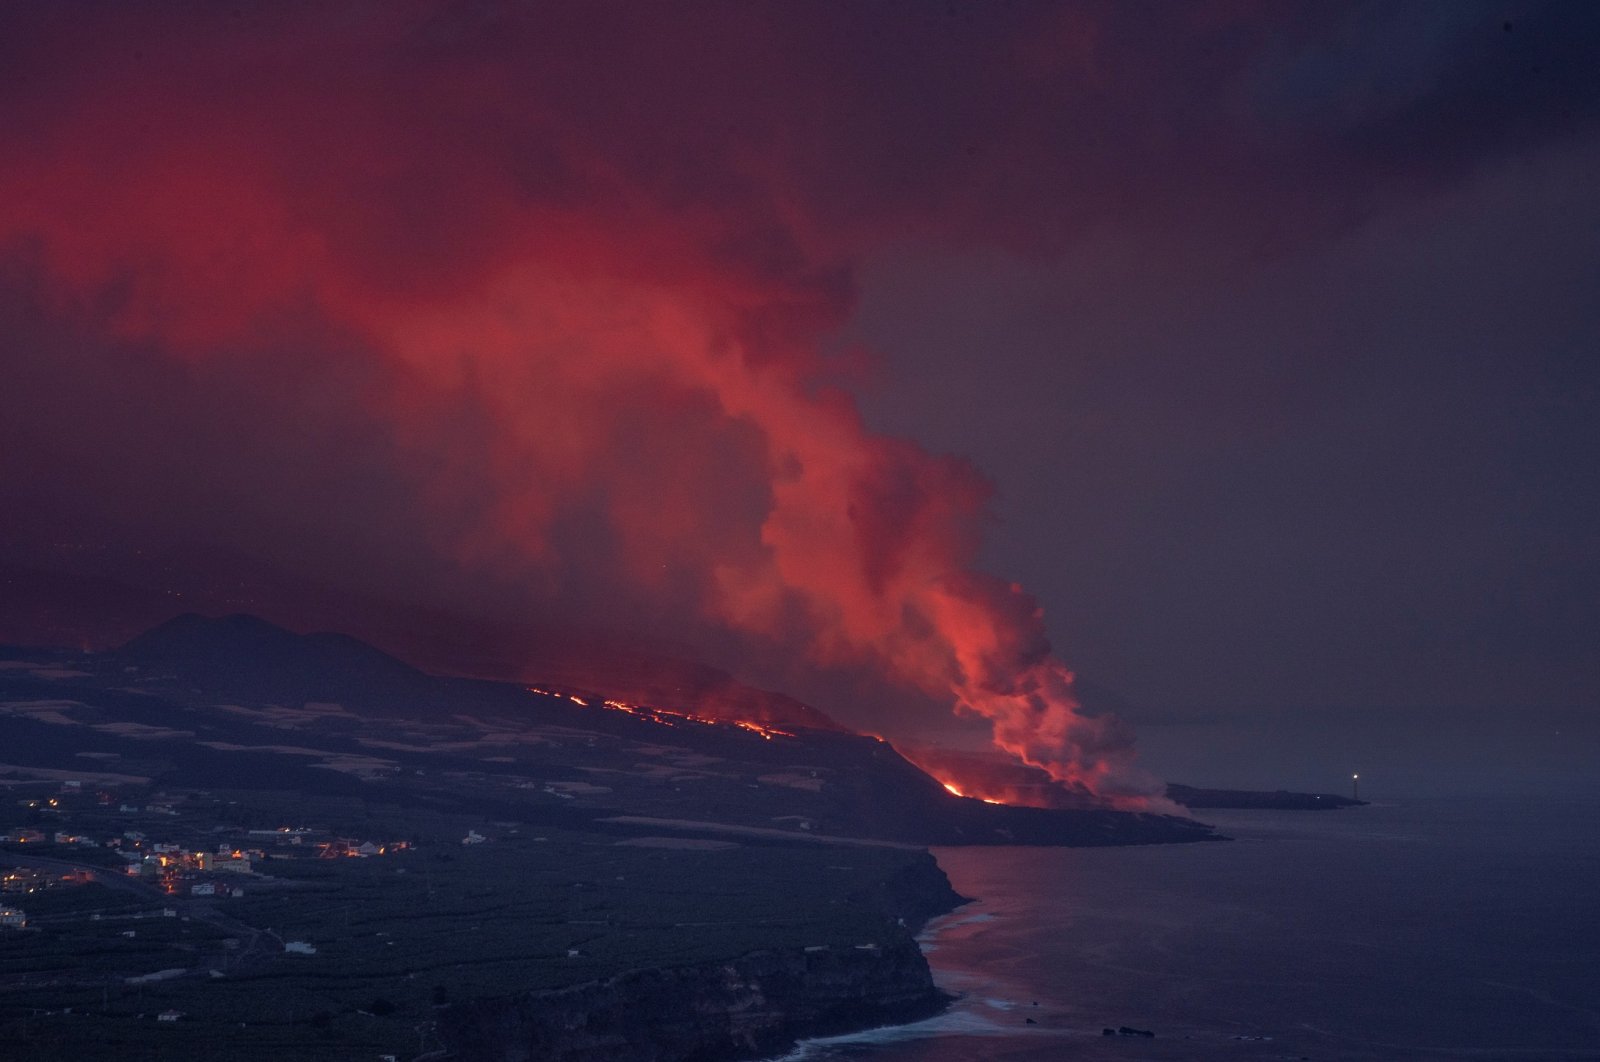 Lava expelled by Cumbre Vieja volcano reaches the sea as seen from Tazacorte in La Palma, Canary Islands, Spain, Nov. 16, 2021.